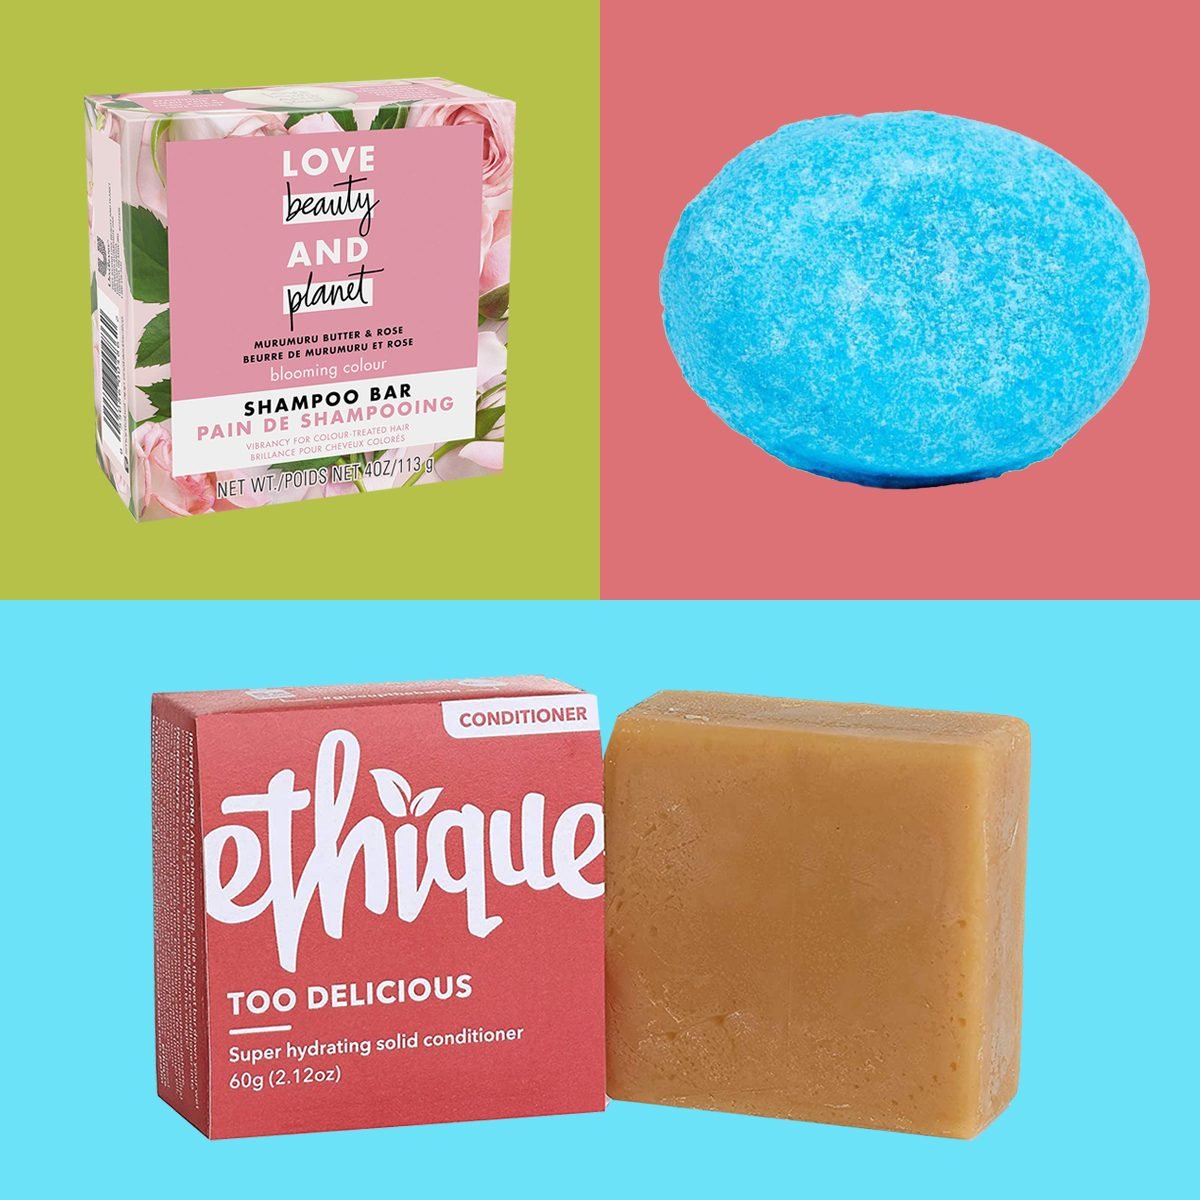 Best shampoo bars for every hair type and concern